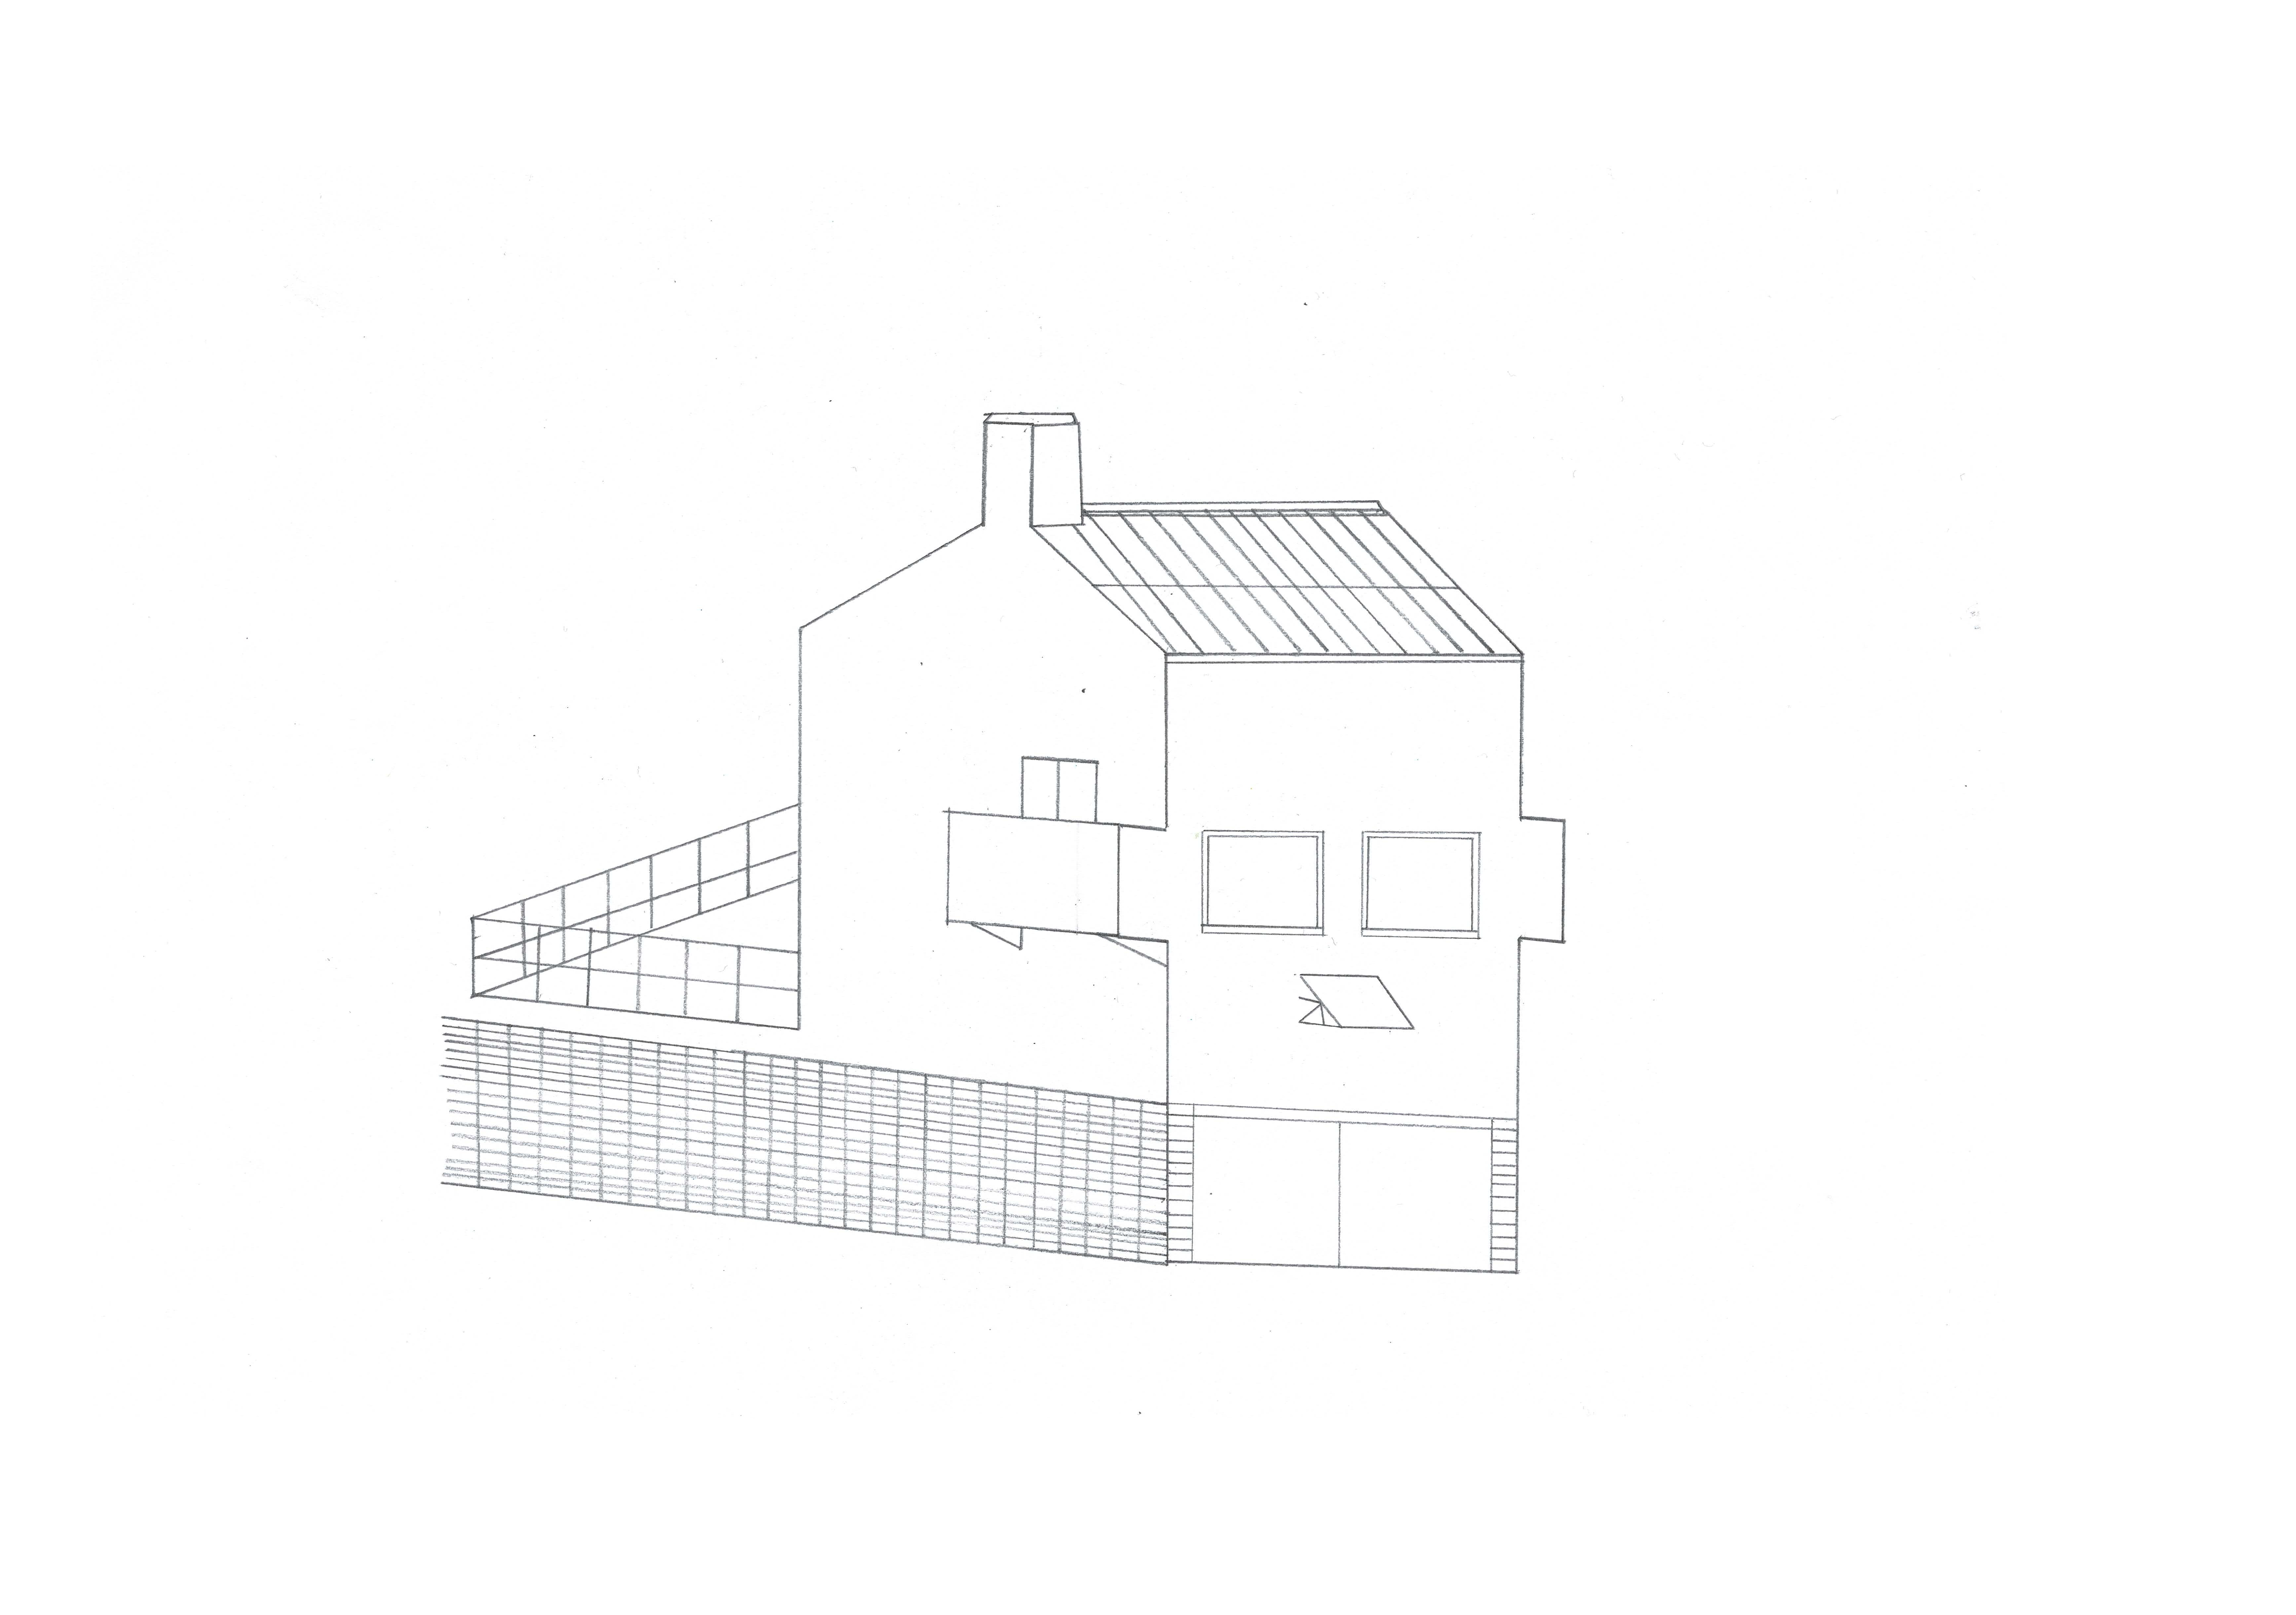 pencil drawing of a house with a facade like a face with two windows for eyes, an awning for a nose, and a garage for a mouth with a chimney and pitched roof